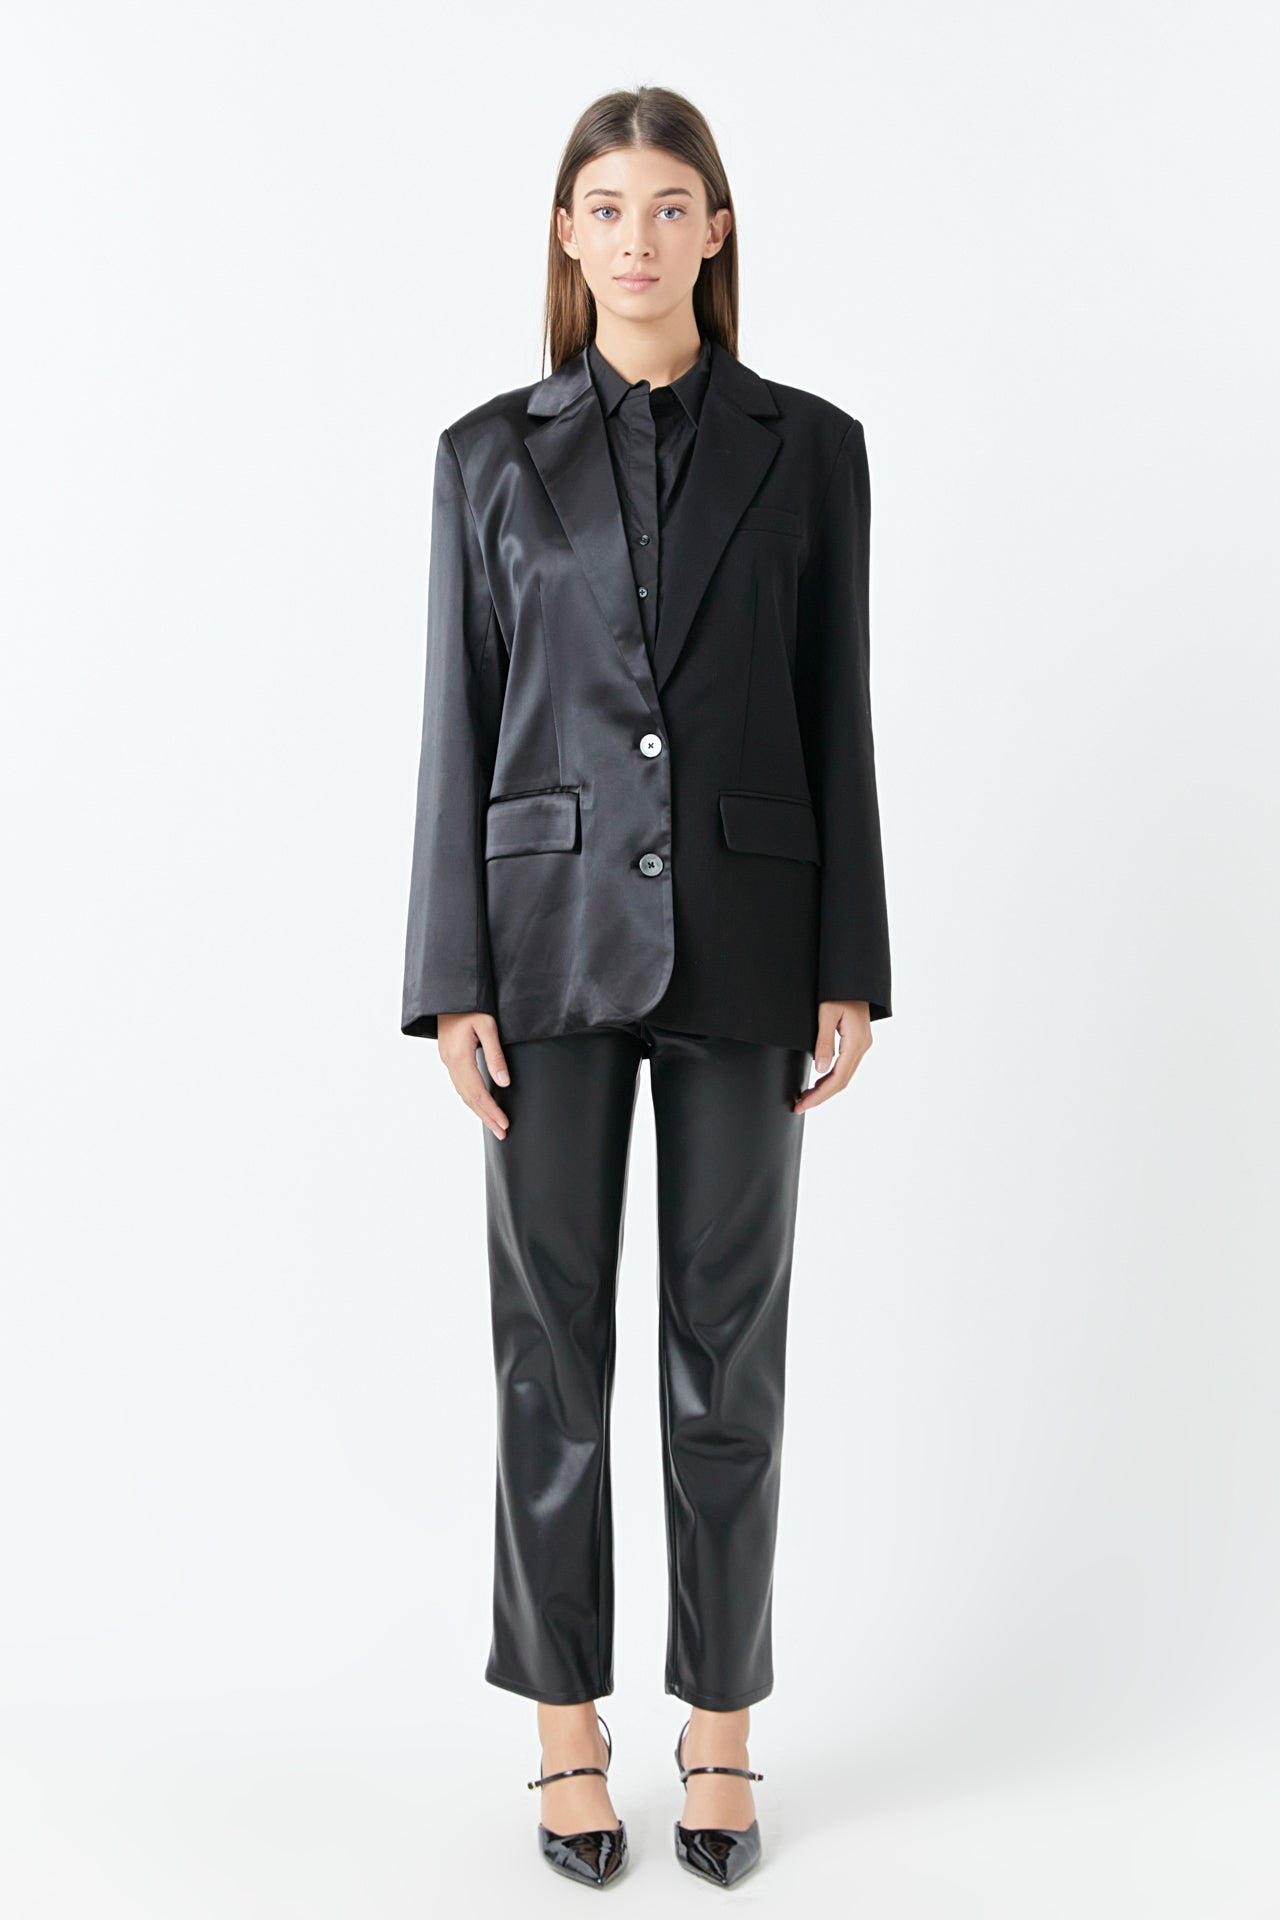 ENDLESS ROSE - Satin Suit Blazer - BLAZERS available at Objectrare